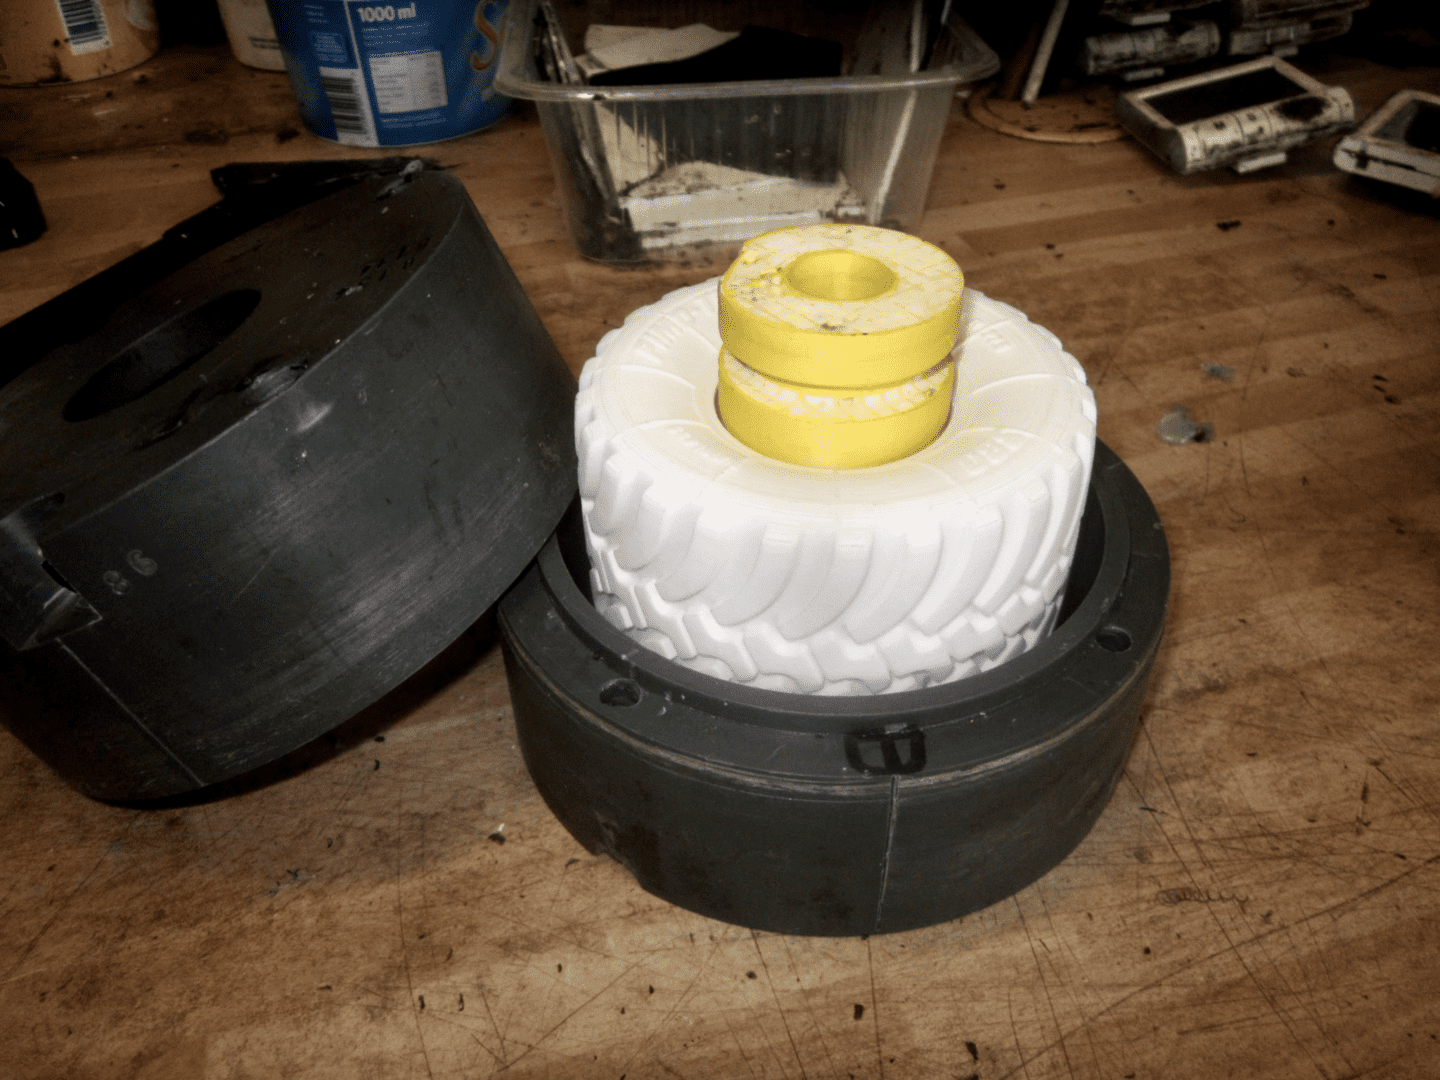 PU foam flows into the SLS printed mould over the yellow part and the tyres are formed